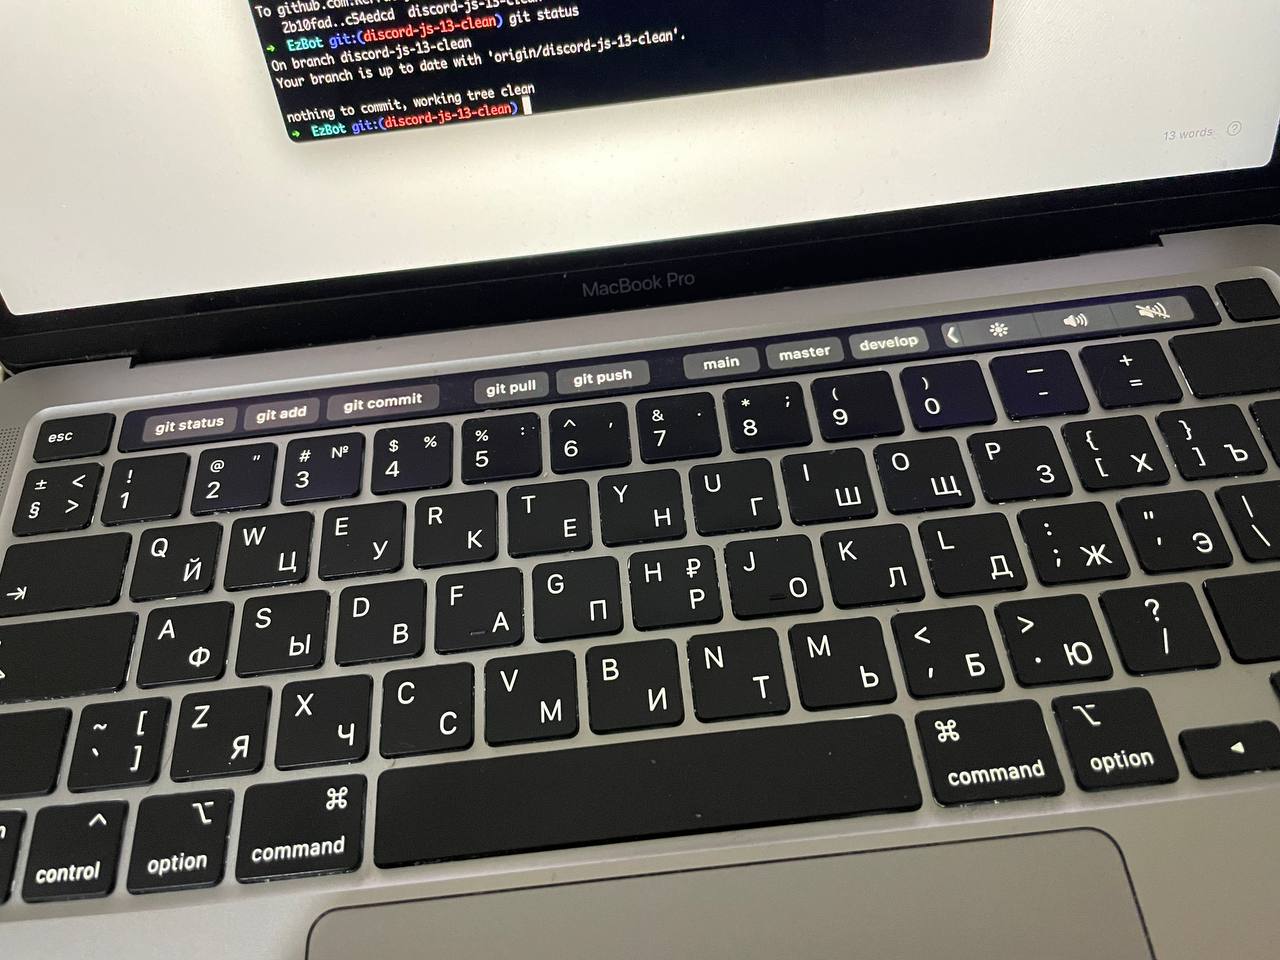 Macbook touch bar for git in iTerm2